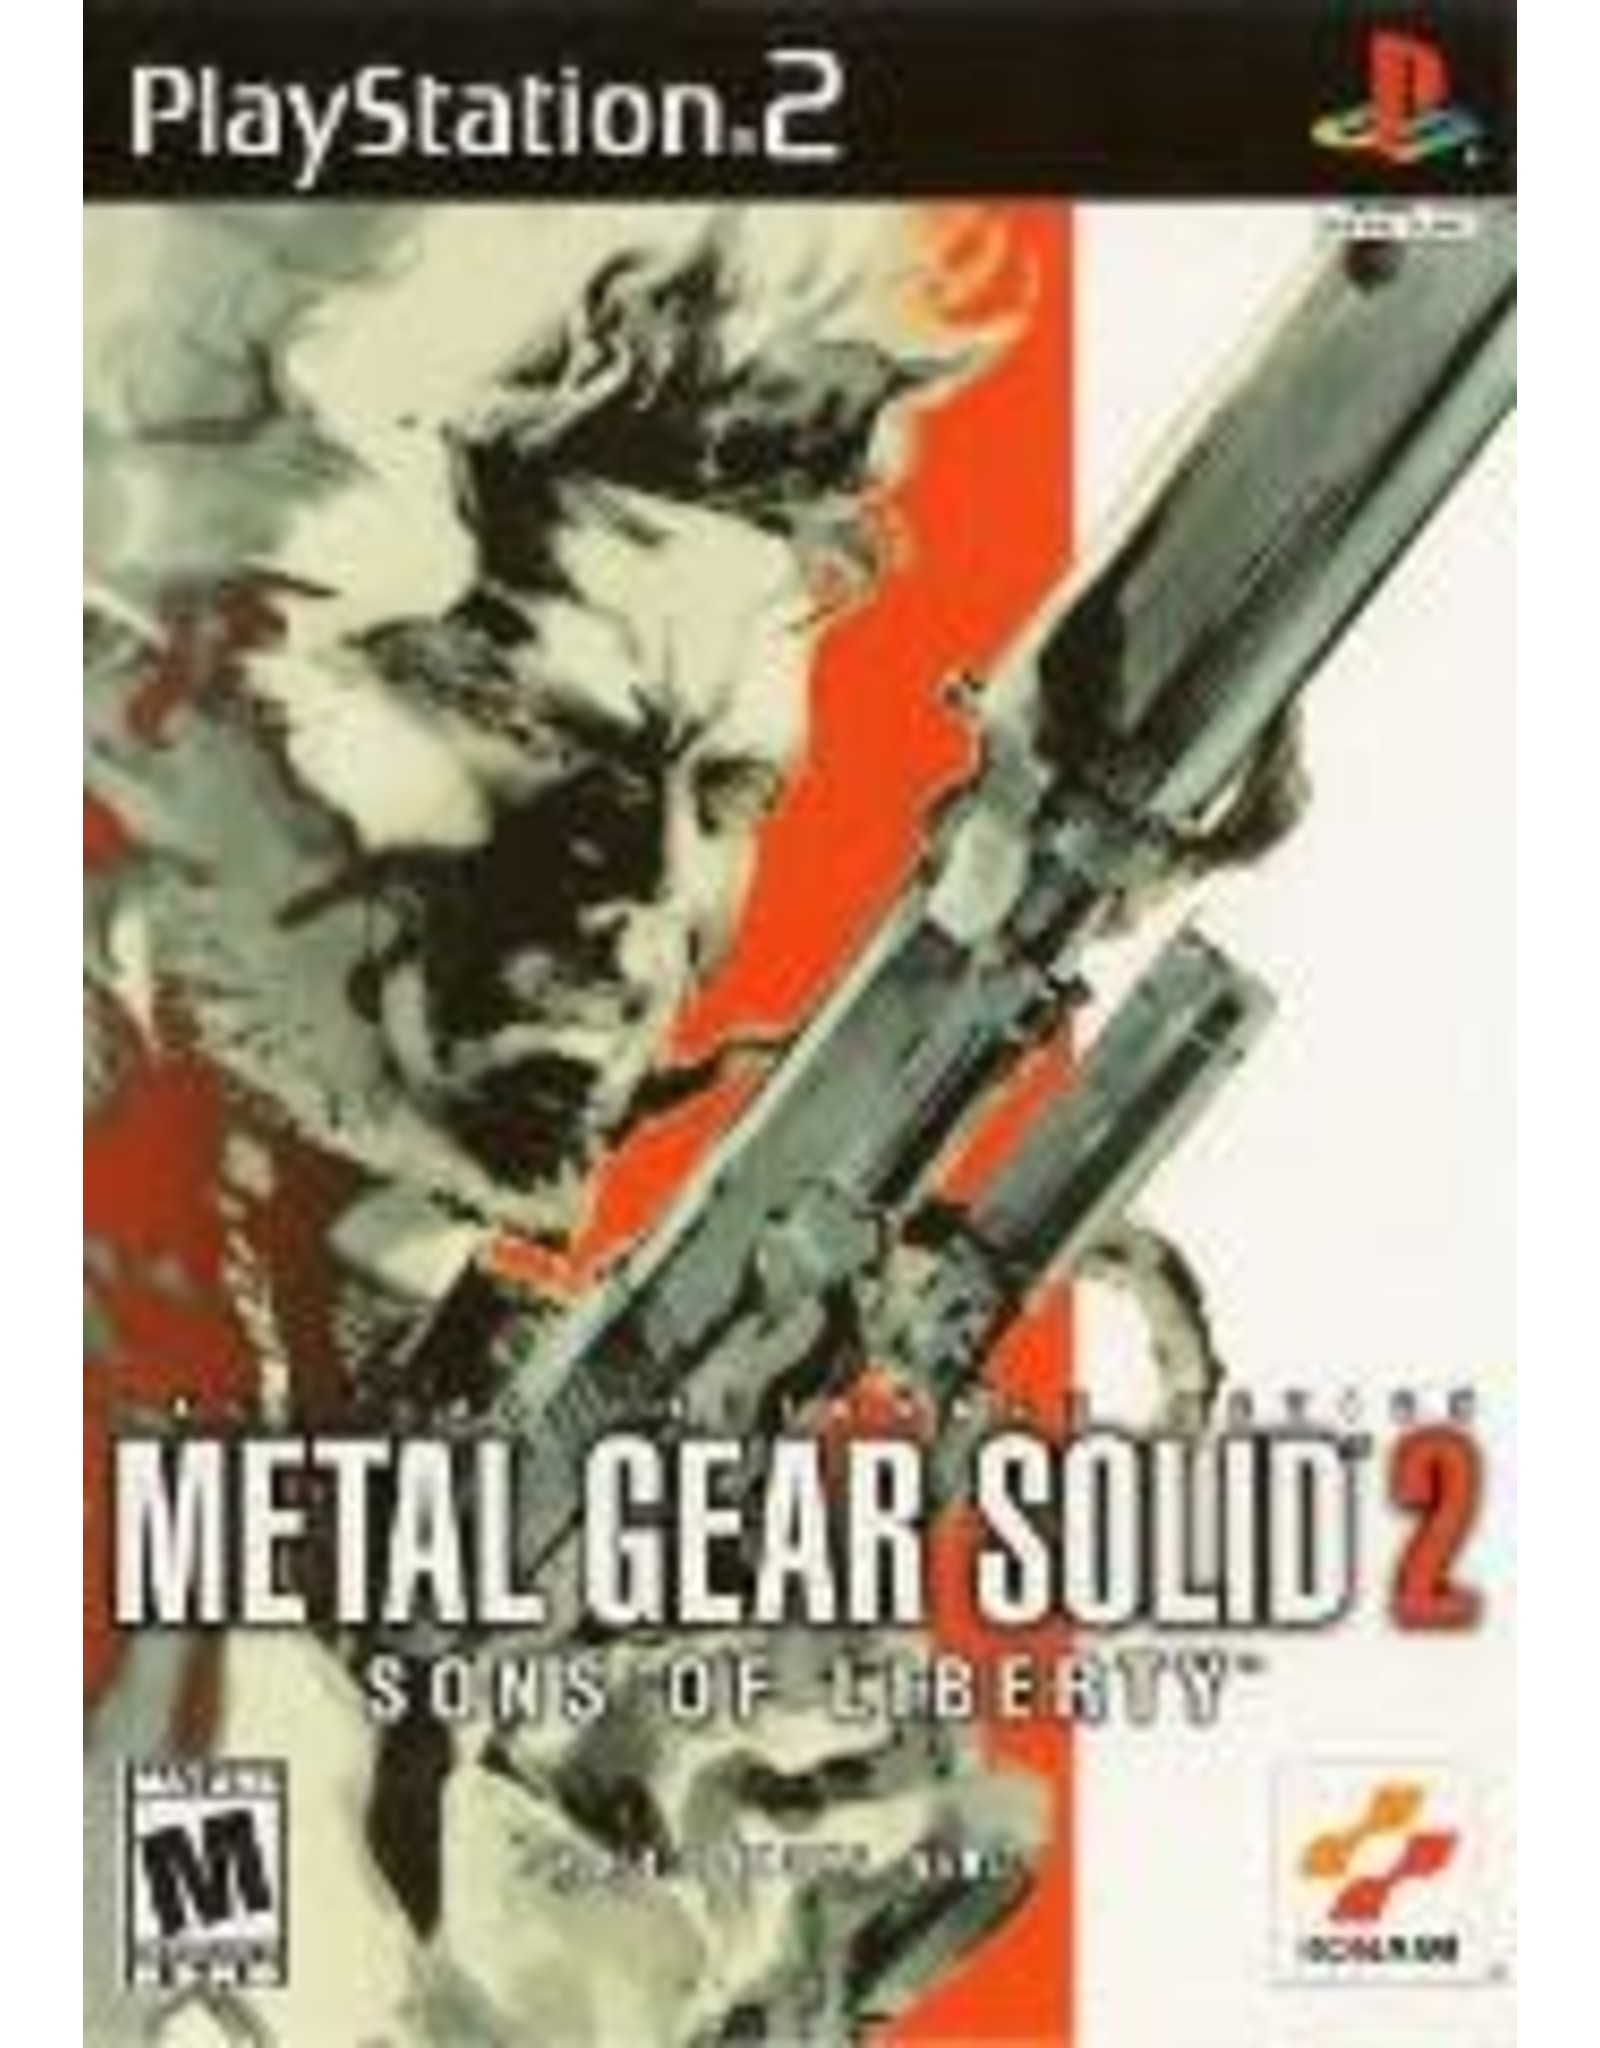 Playstation 2 Metal Gear Solid 2 Sons of Liberty (Used)